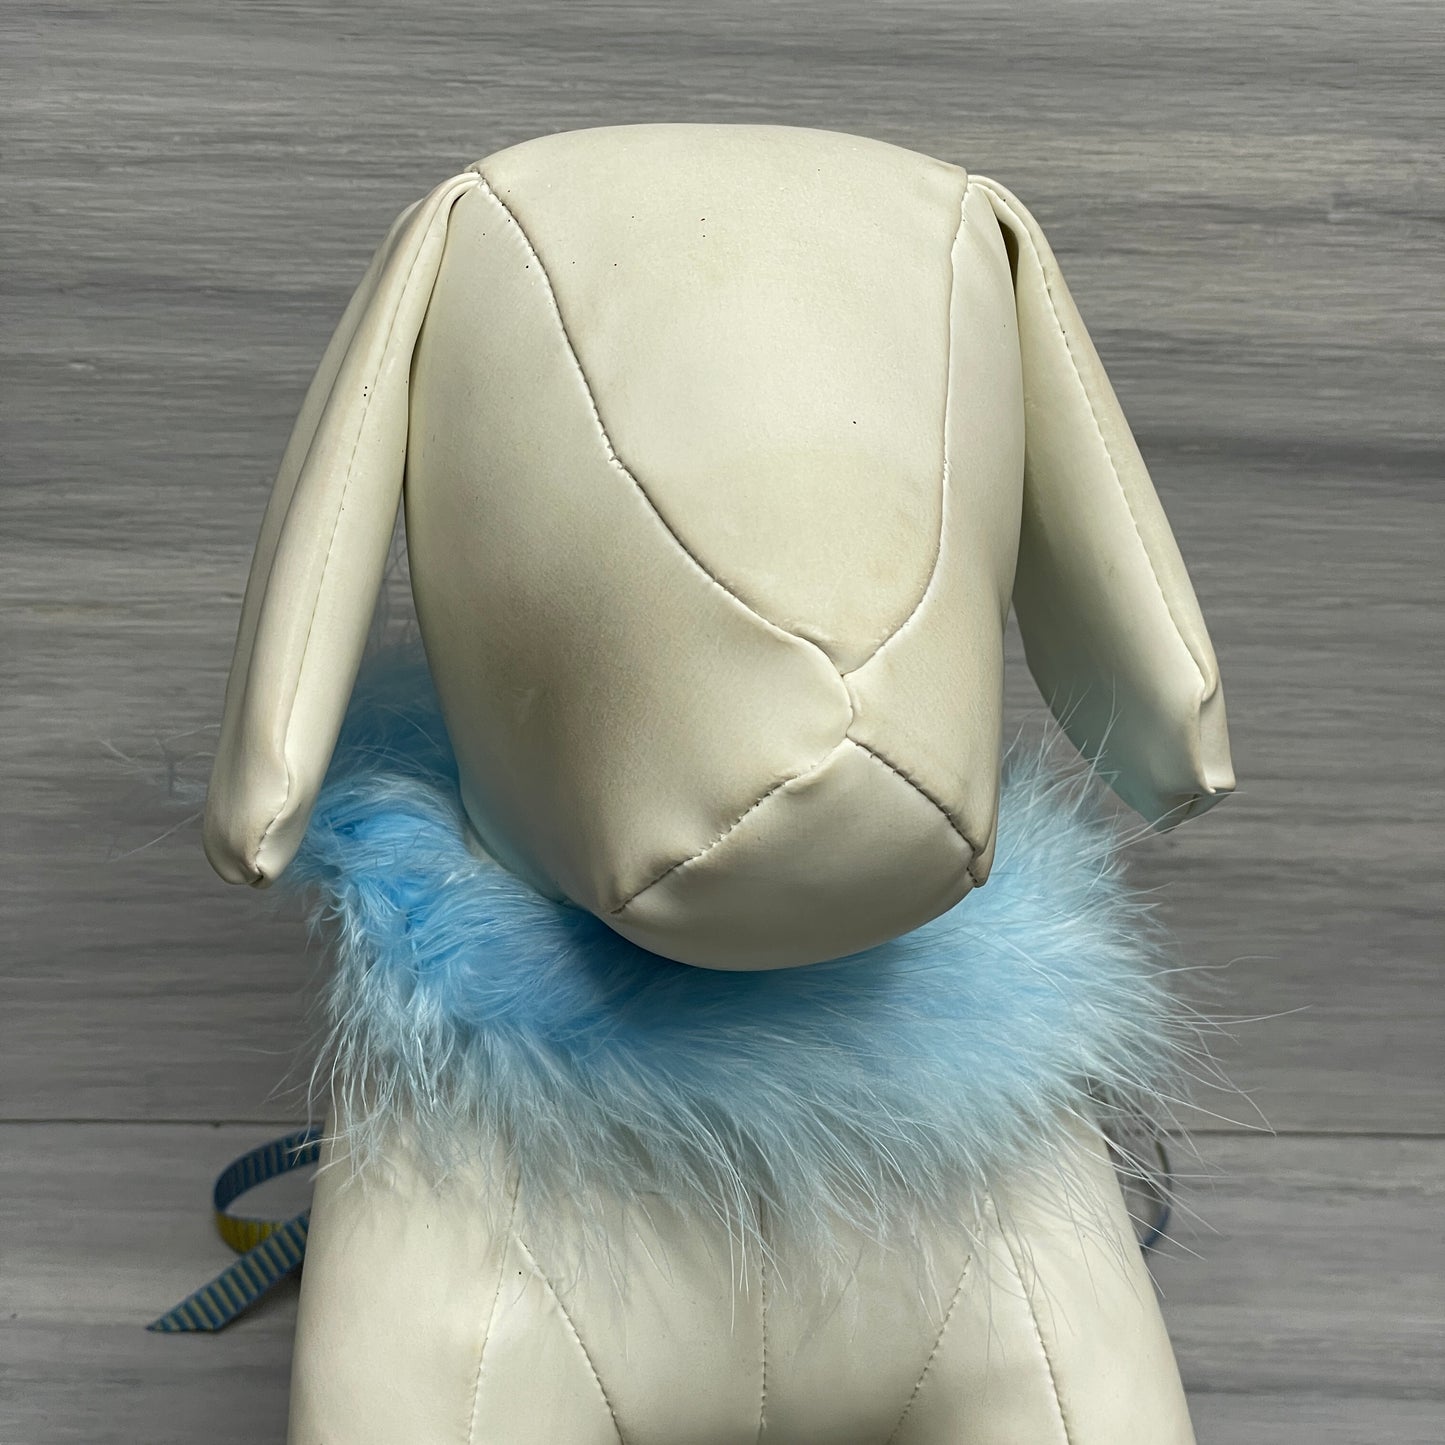 Frozen - Large Couture Collars - 2 "Fur" Collars